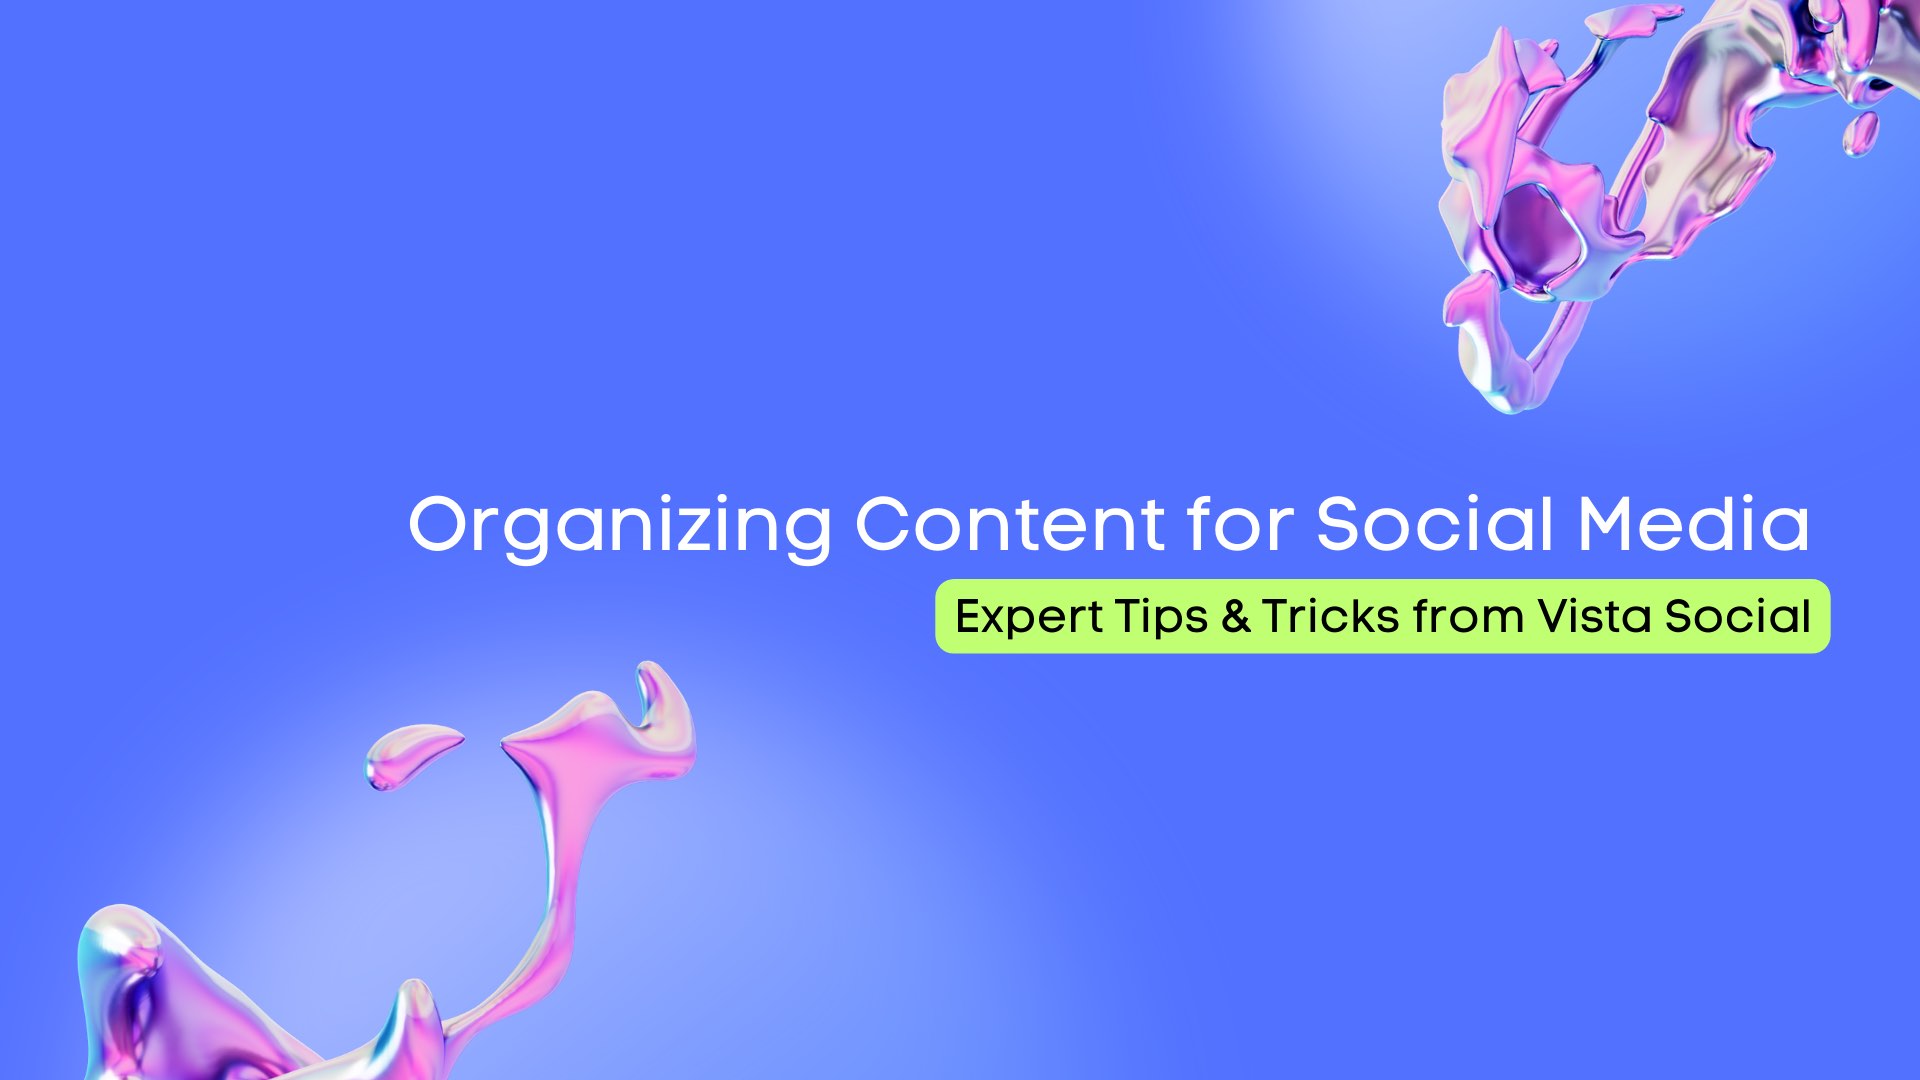 Organizing Content for Social Media - 19